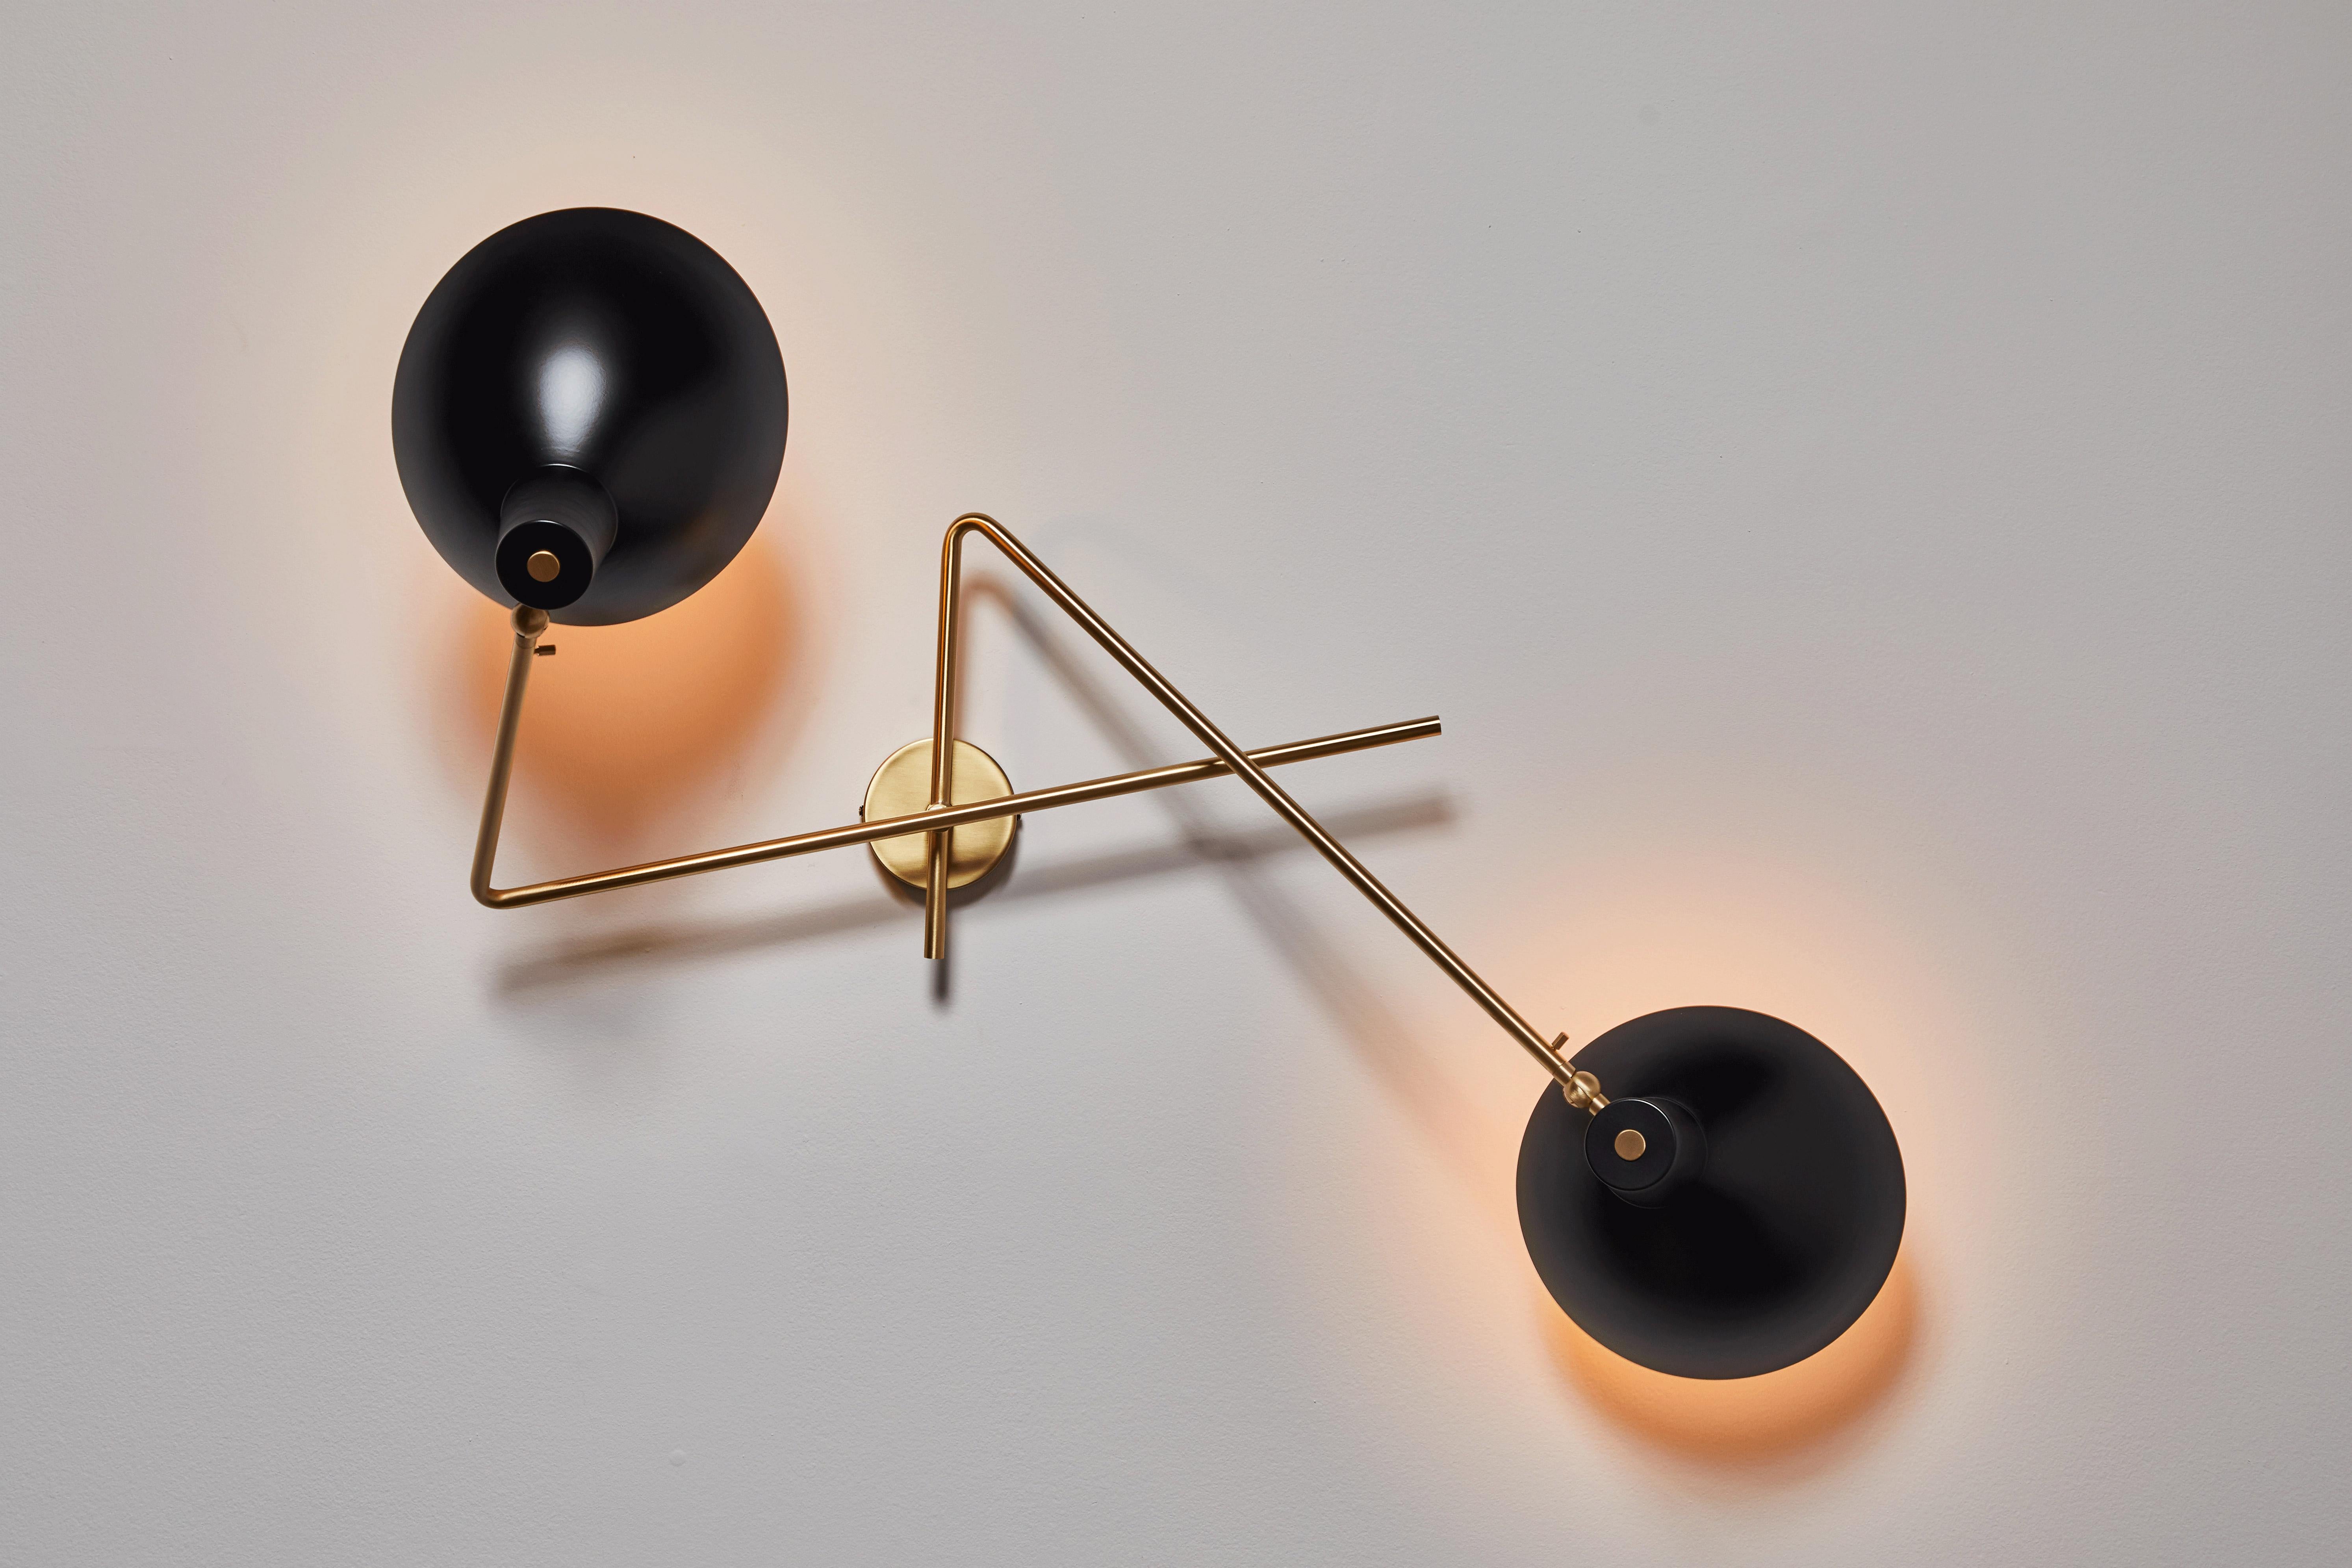 VV Cinquanta twin wall light by Vittoriano Viganó. Originally designed in 1951. Current production with spun aluminum reflectors, anodized brass structure. Light source 2 x E27 LED 6W 2700K non-dimmable bulbs Included. Customization required for